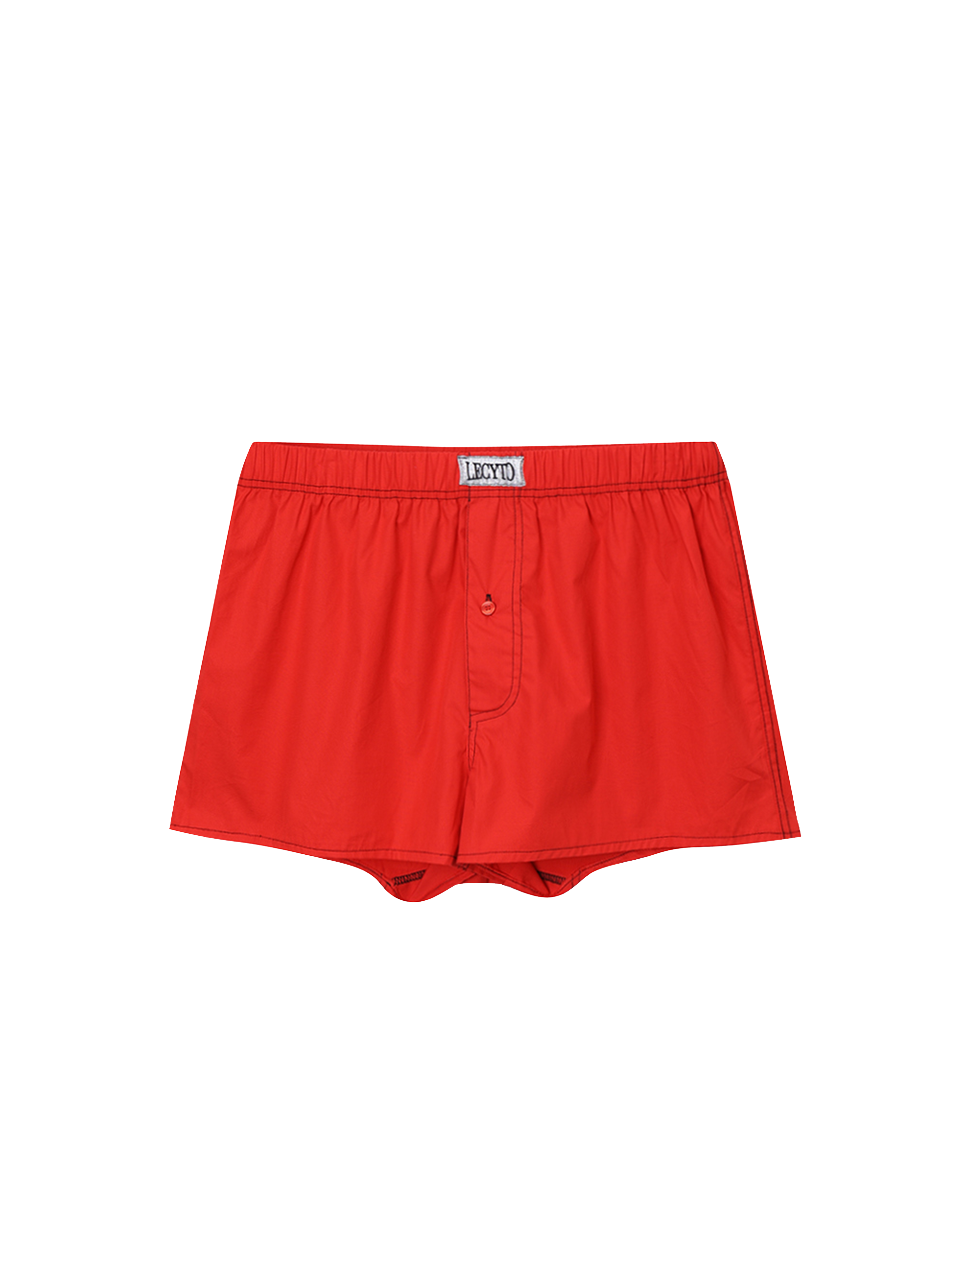 Layered Trunk Pants_[Red]